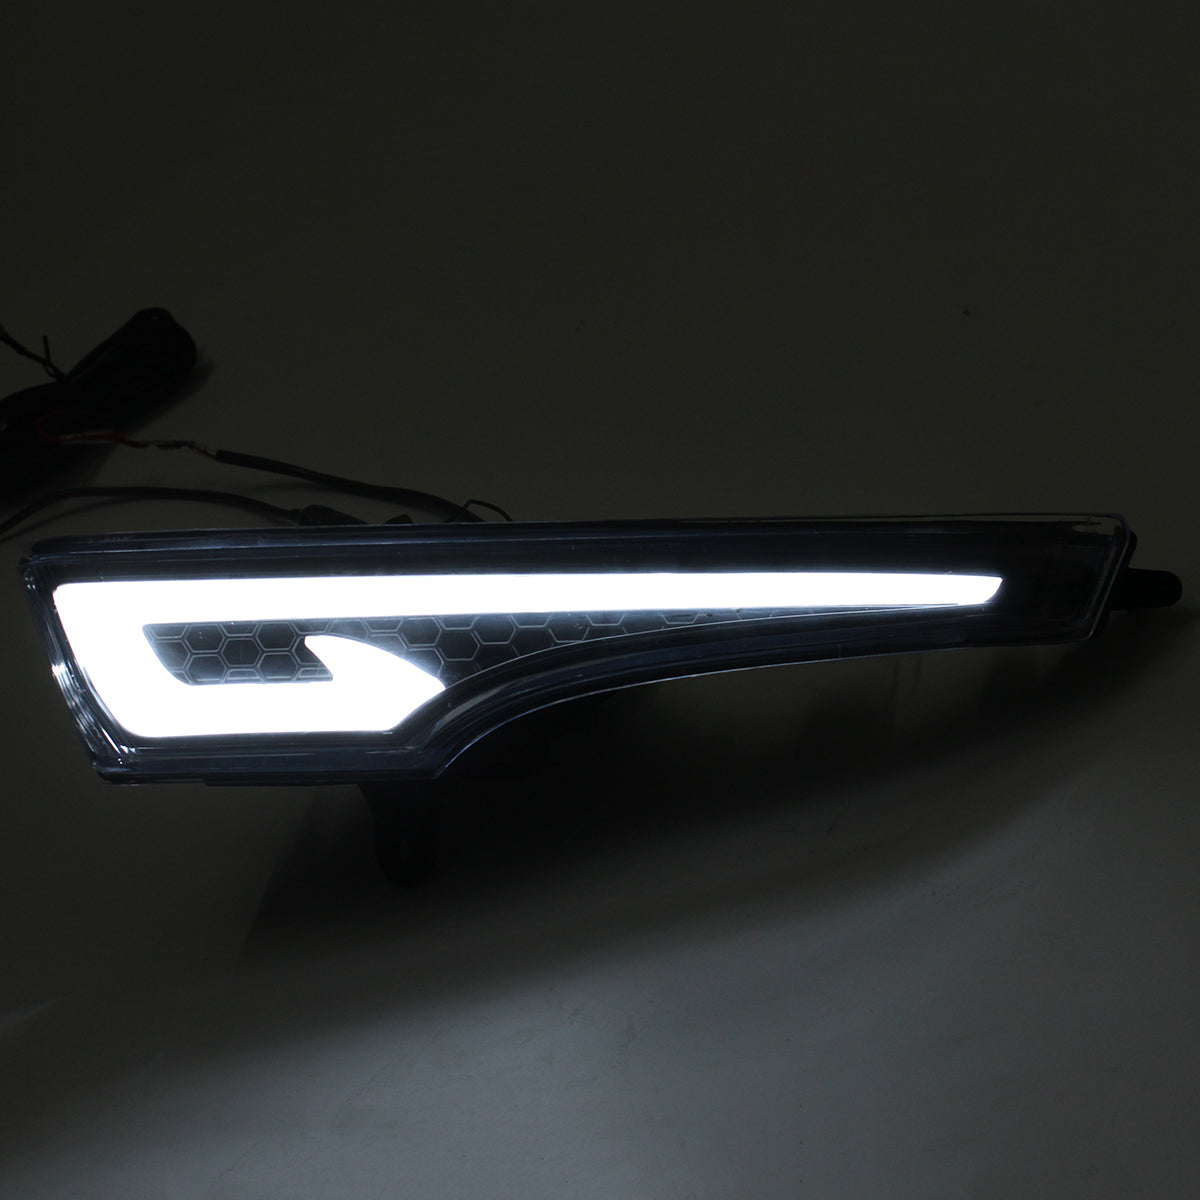 Ghost White 2Pcs Car LED Daytime Running Lights DRL Turn Lamps for Nissan Altima Teana 2013-2015